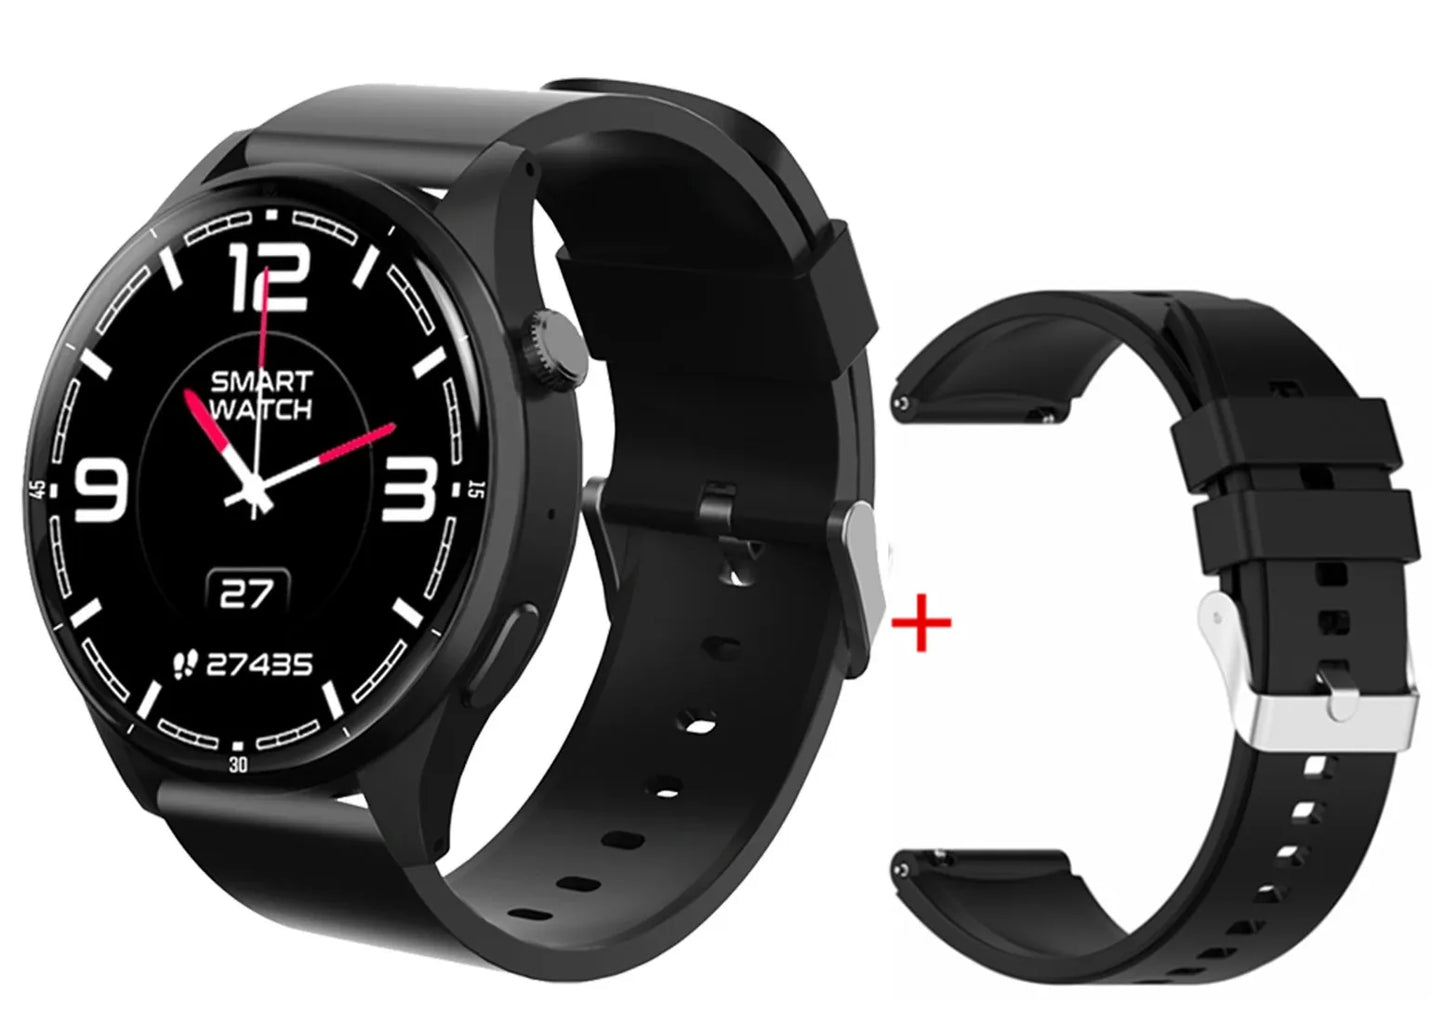 Smartwatch with 4G Network, Video Chat, SOS Call, GPS, and Android 8.1 System